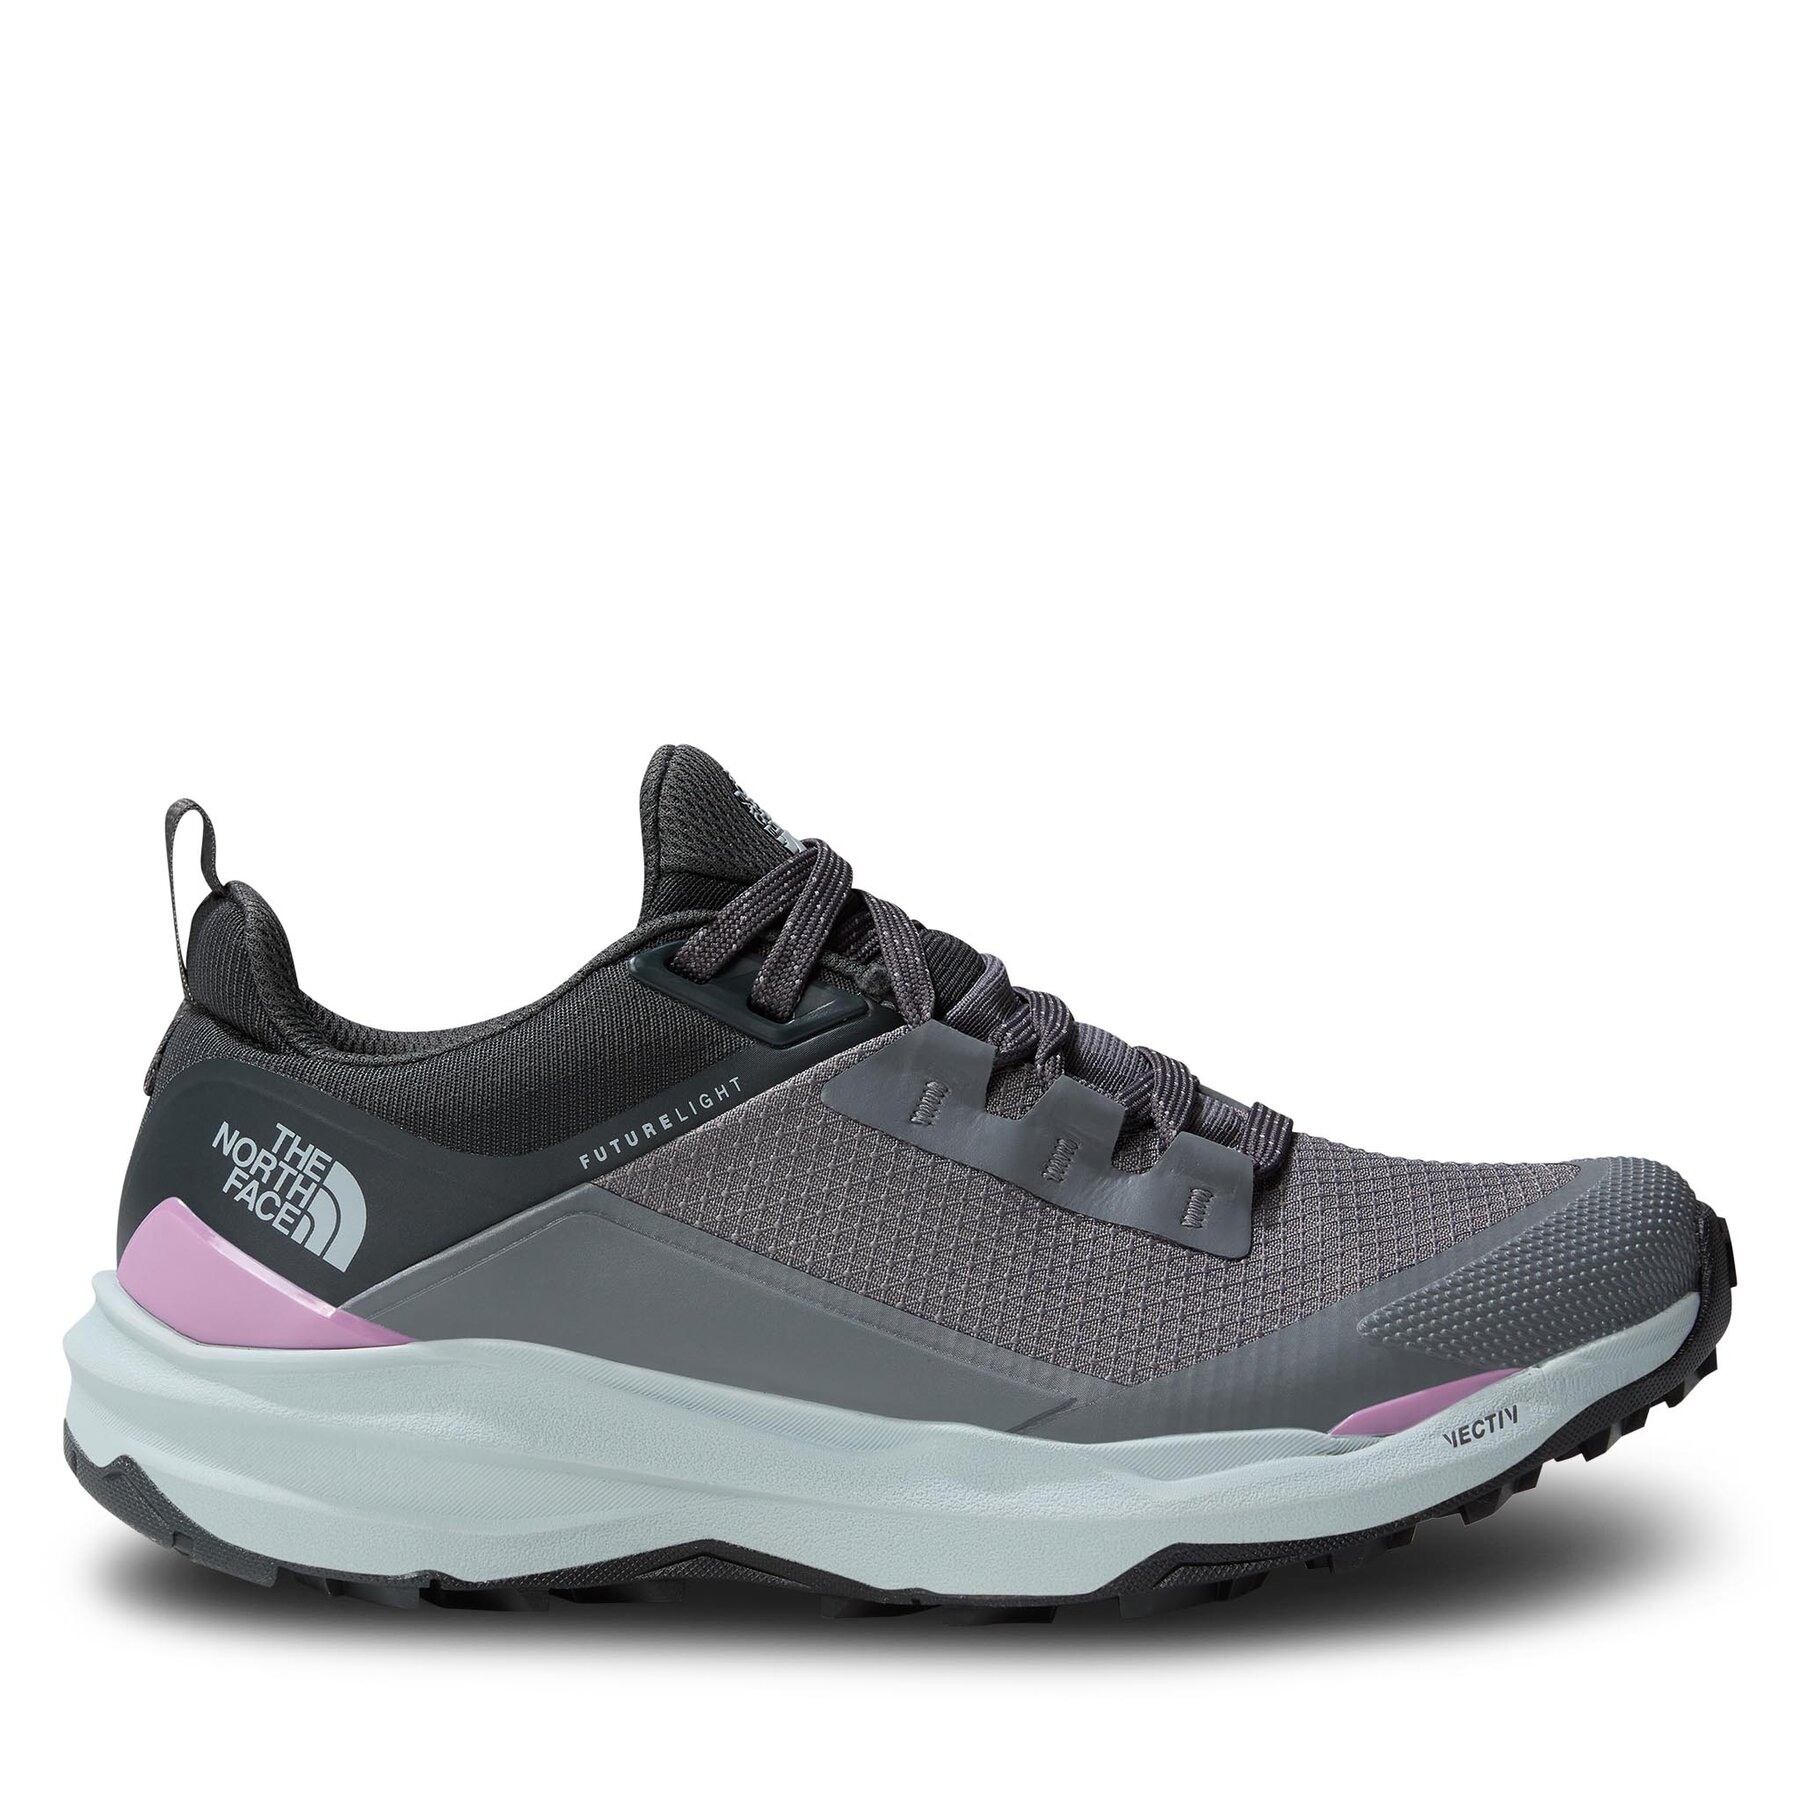 Trekkingschuhe The North Face Vectiv Exploris 2 NF0A7W6DSOU1 Smoked Pearl/Asphalt Gr von The North Face